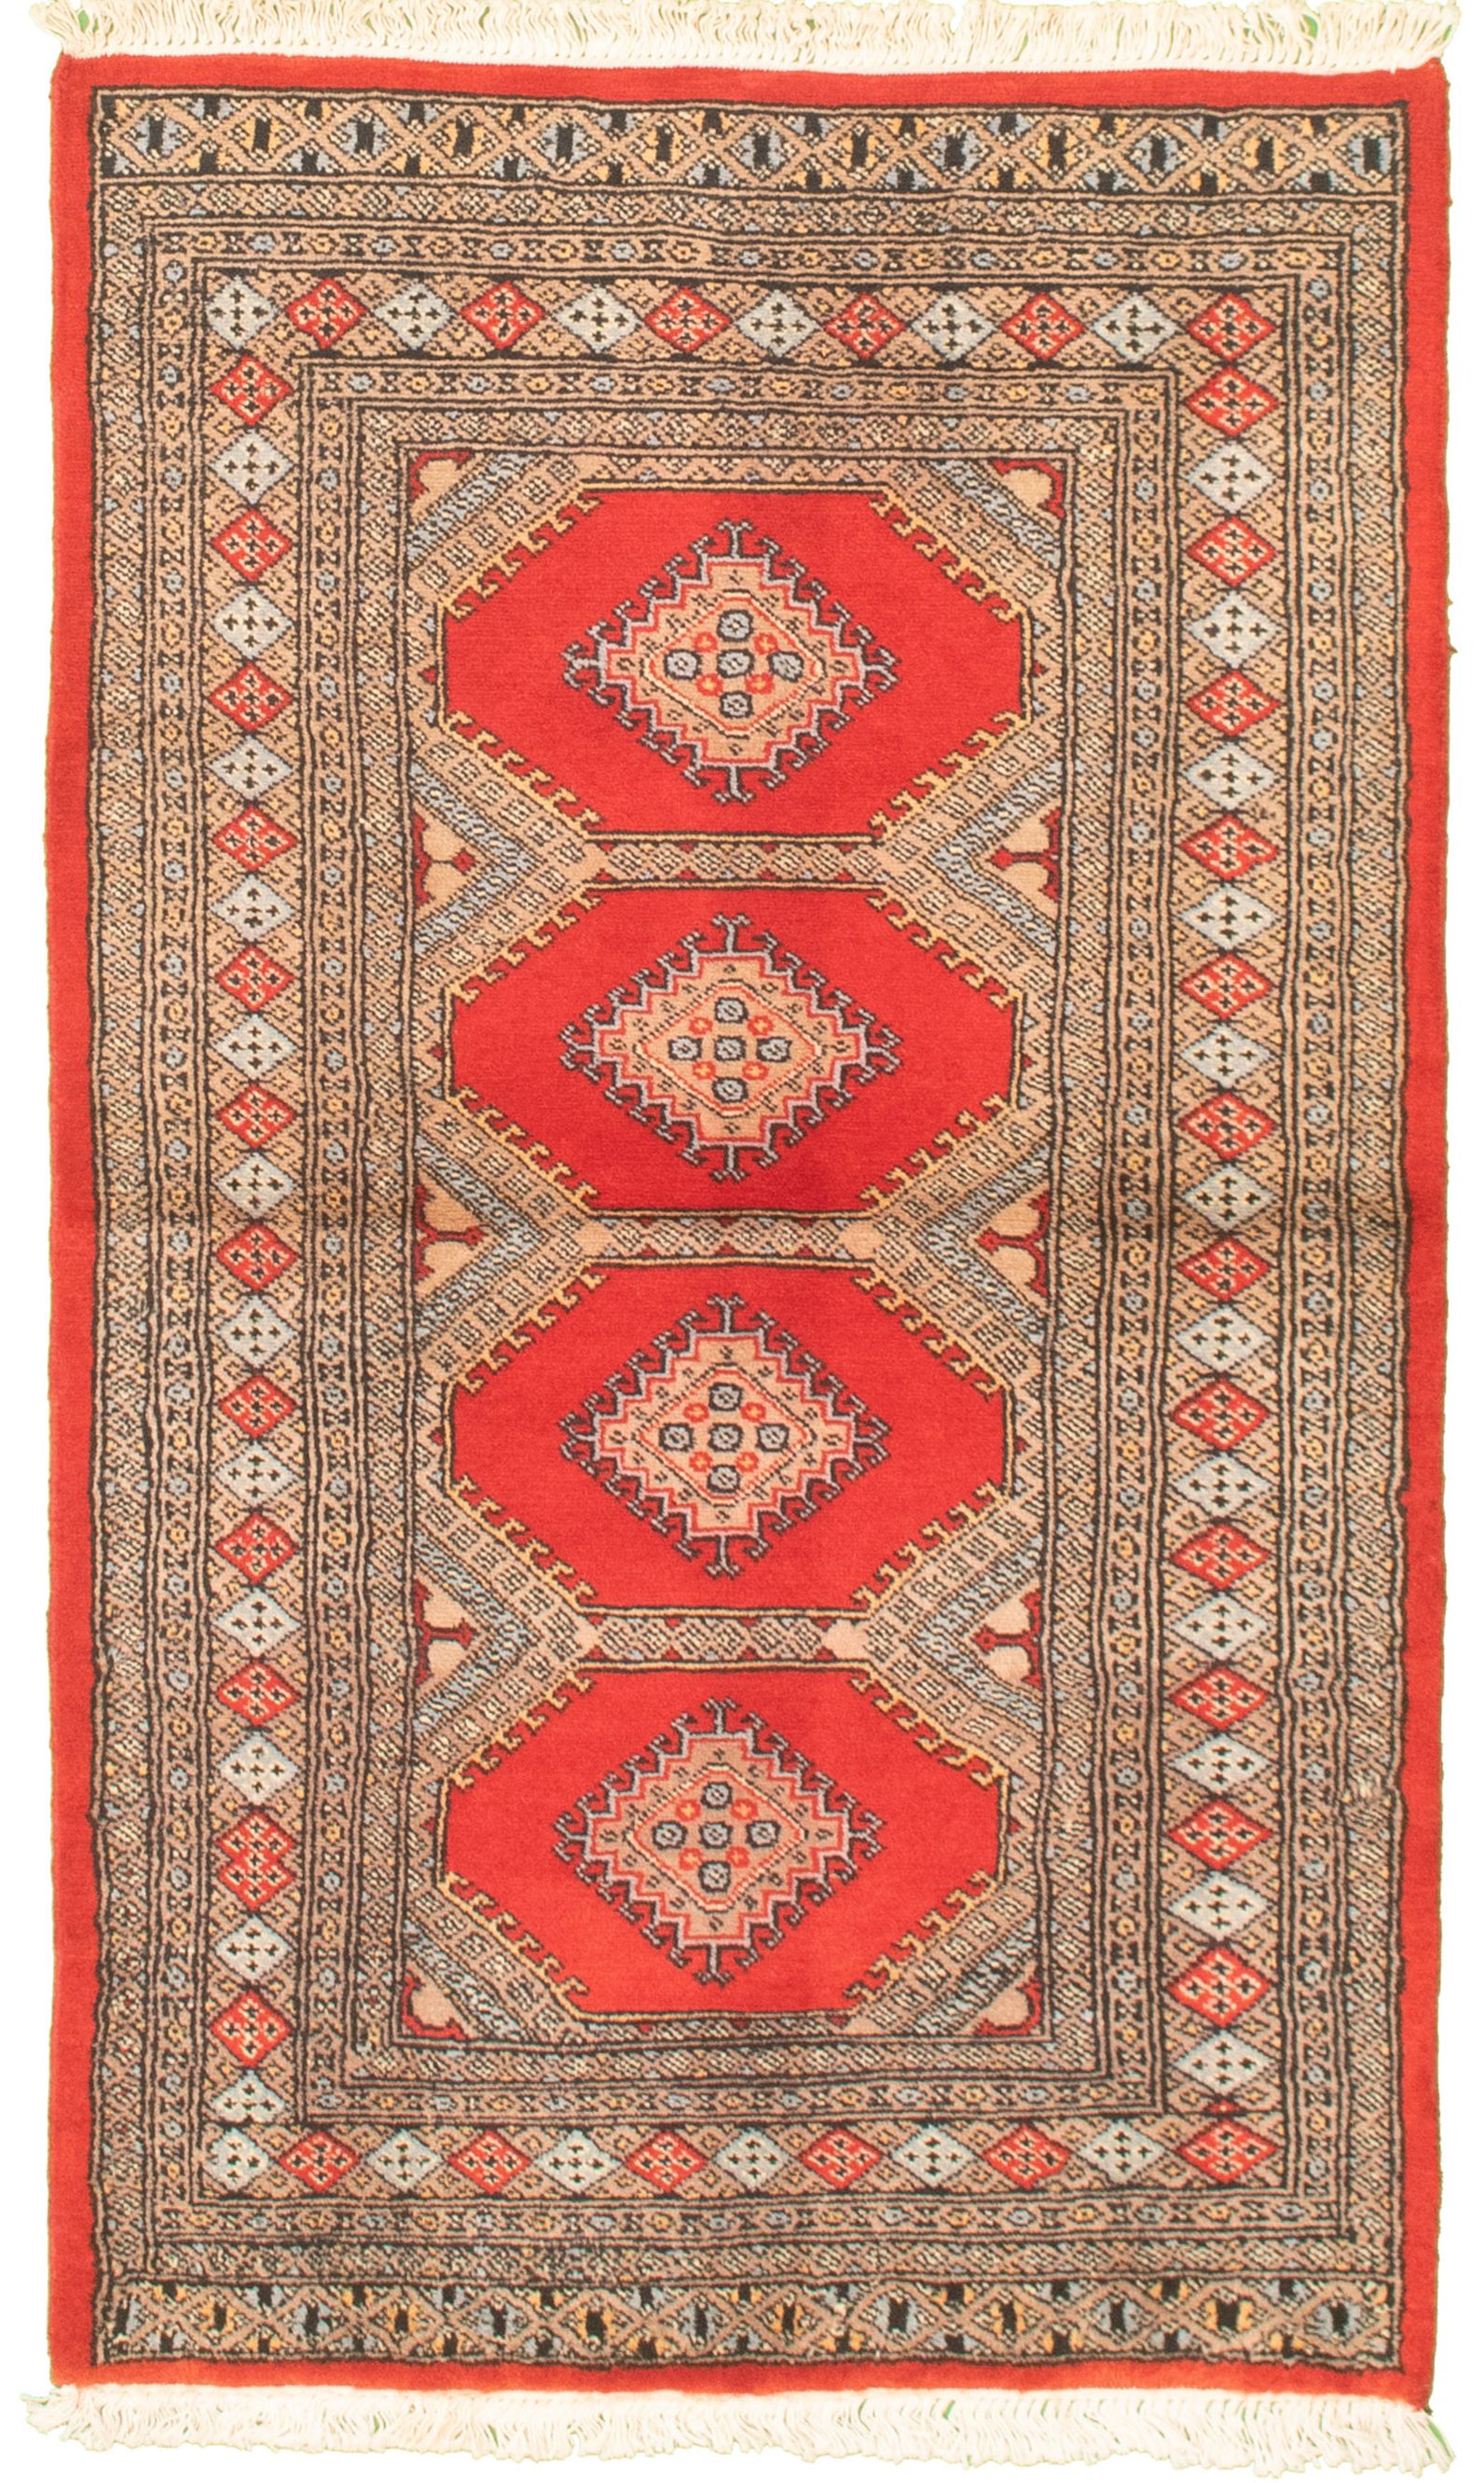 Hand-knotted Finest Peshawar Bokhara Red Wool Rug 3'1" x 5'4"  Size: 3'1" x 5'4"  